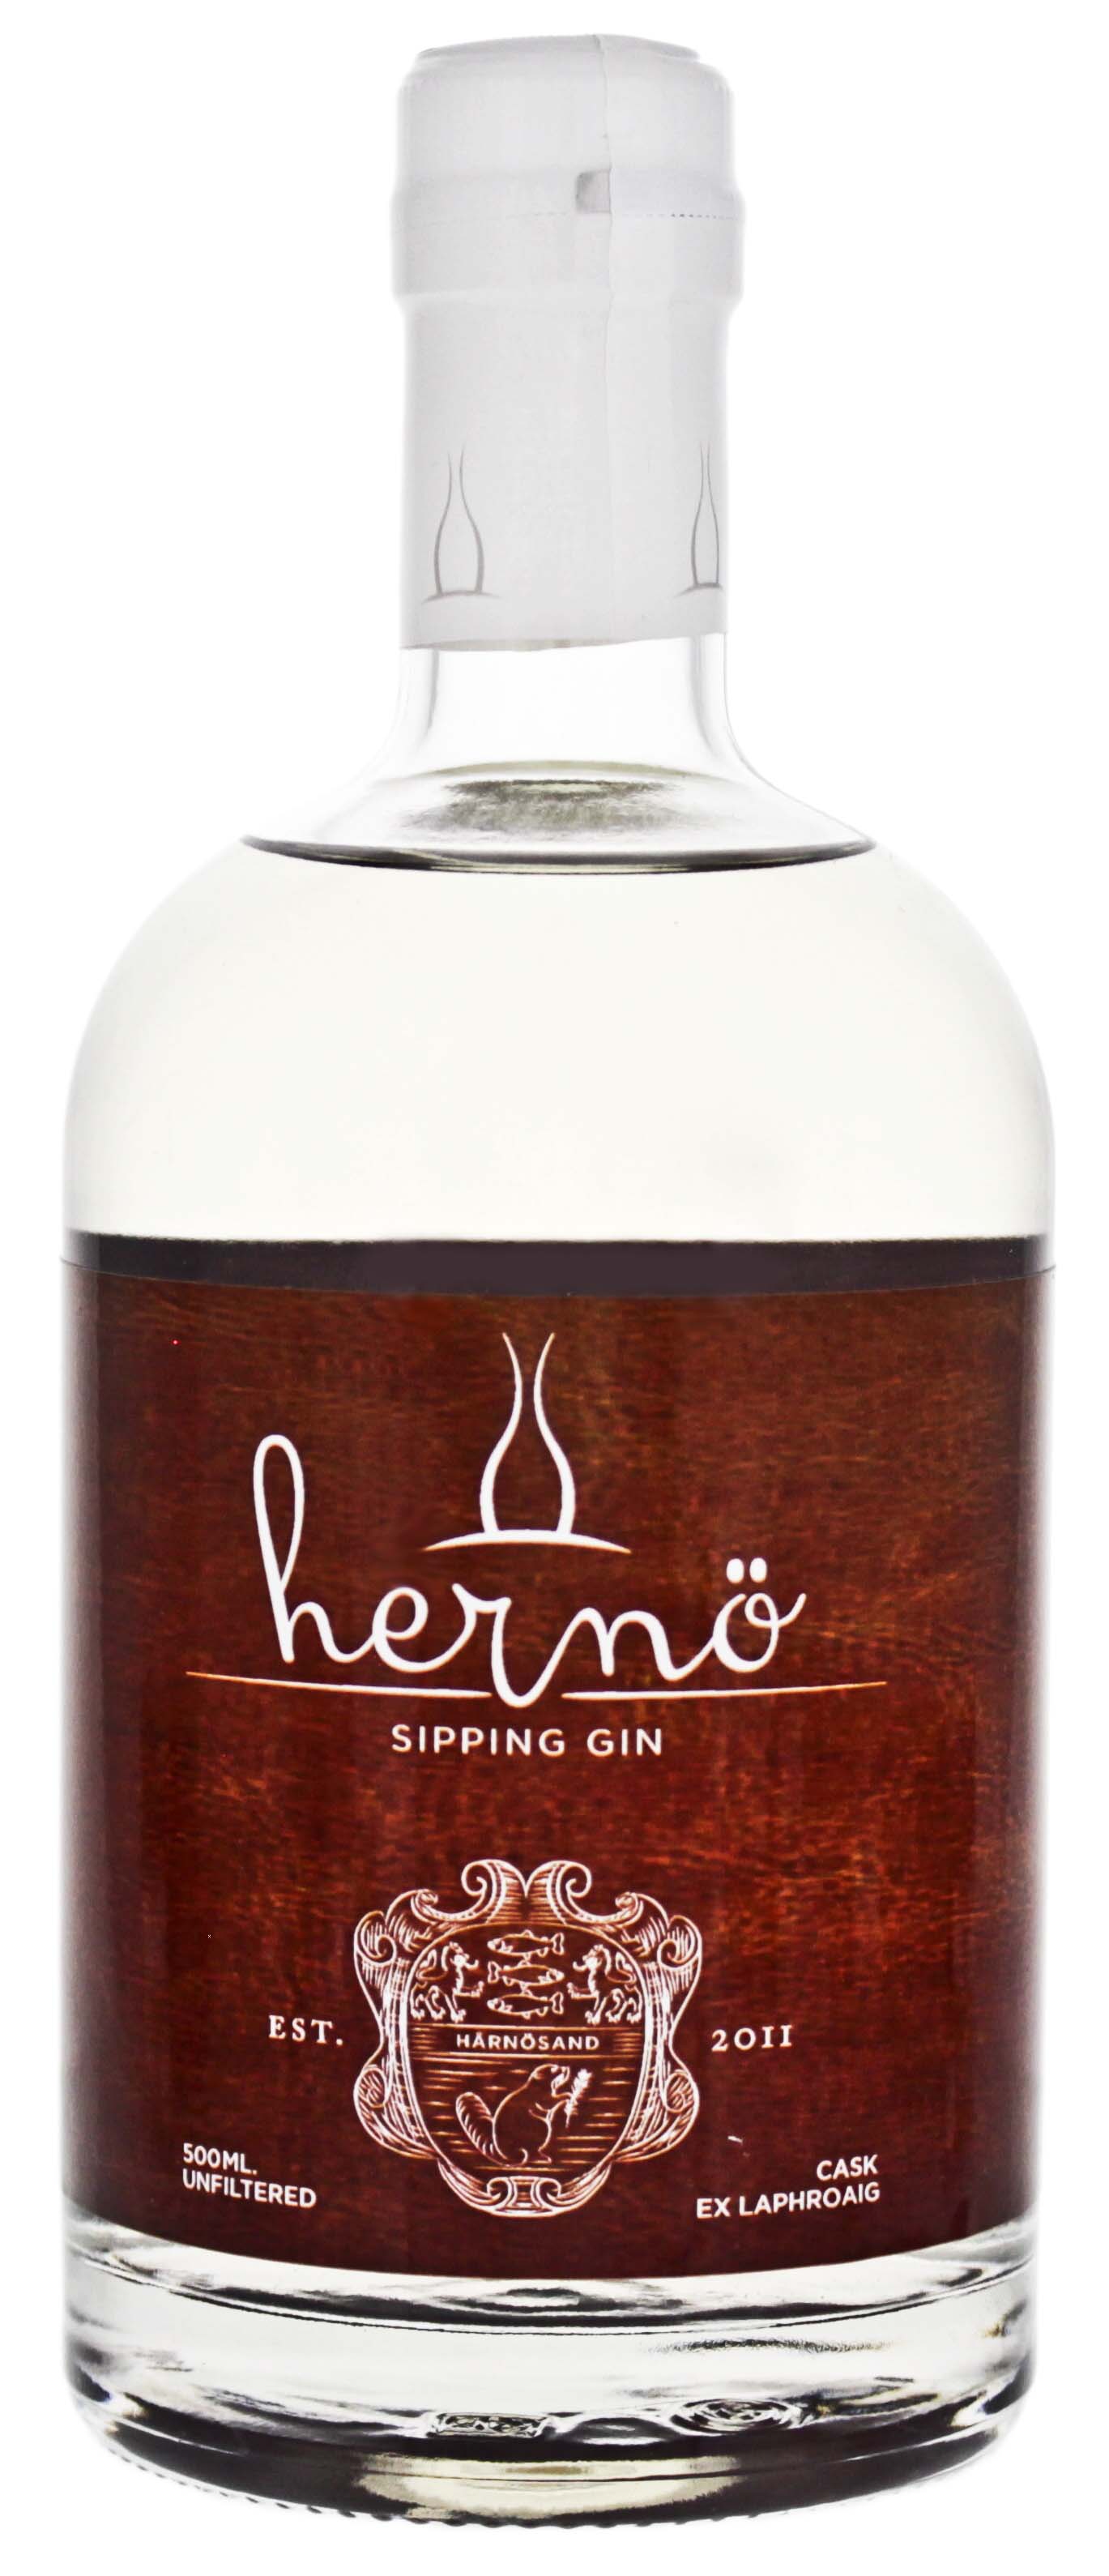 Hernö Sipping Gin No. 1.2 ex Laphroaig Cask 0,5L / limited edition